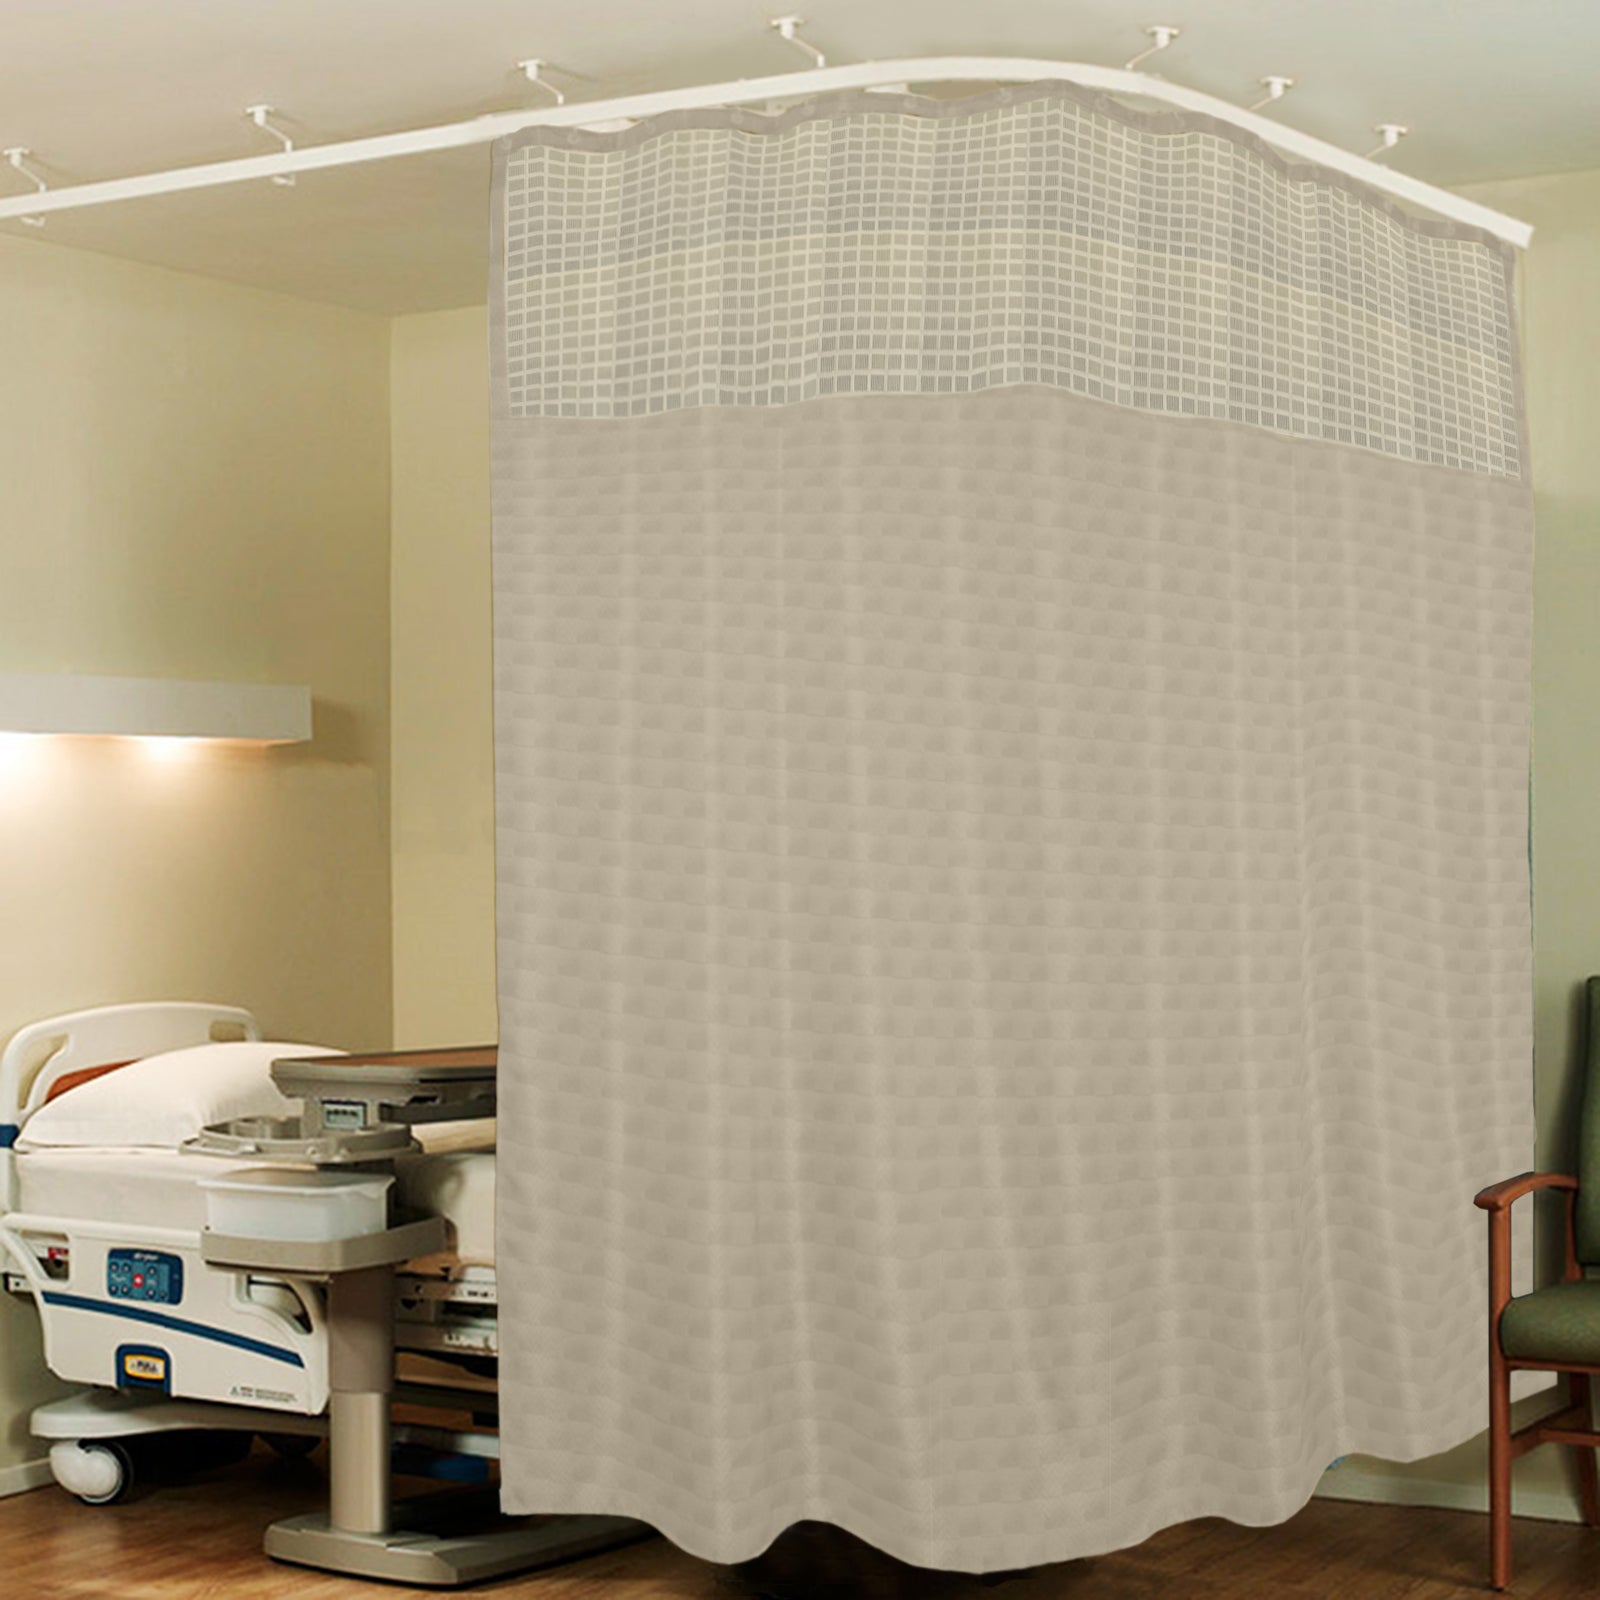 Hospital Partition Curtains, Clinic Curtains Size 10 FT W x 7 ft H, Channel Curtains with Net Fabric, 100% polyester 20 Rustfree Metal Eyelets 20 Plastic Hook, Cream, Box Design (10x7 FT, Pk of 1)